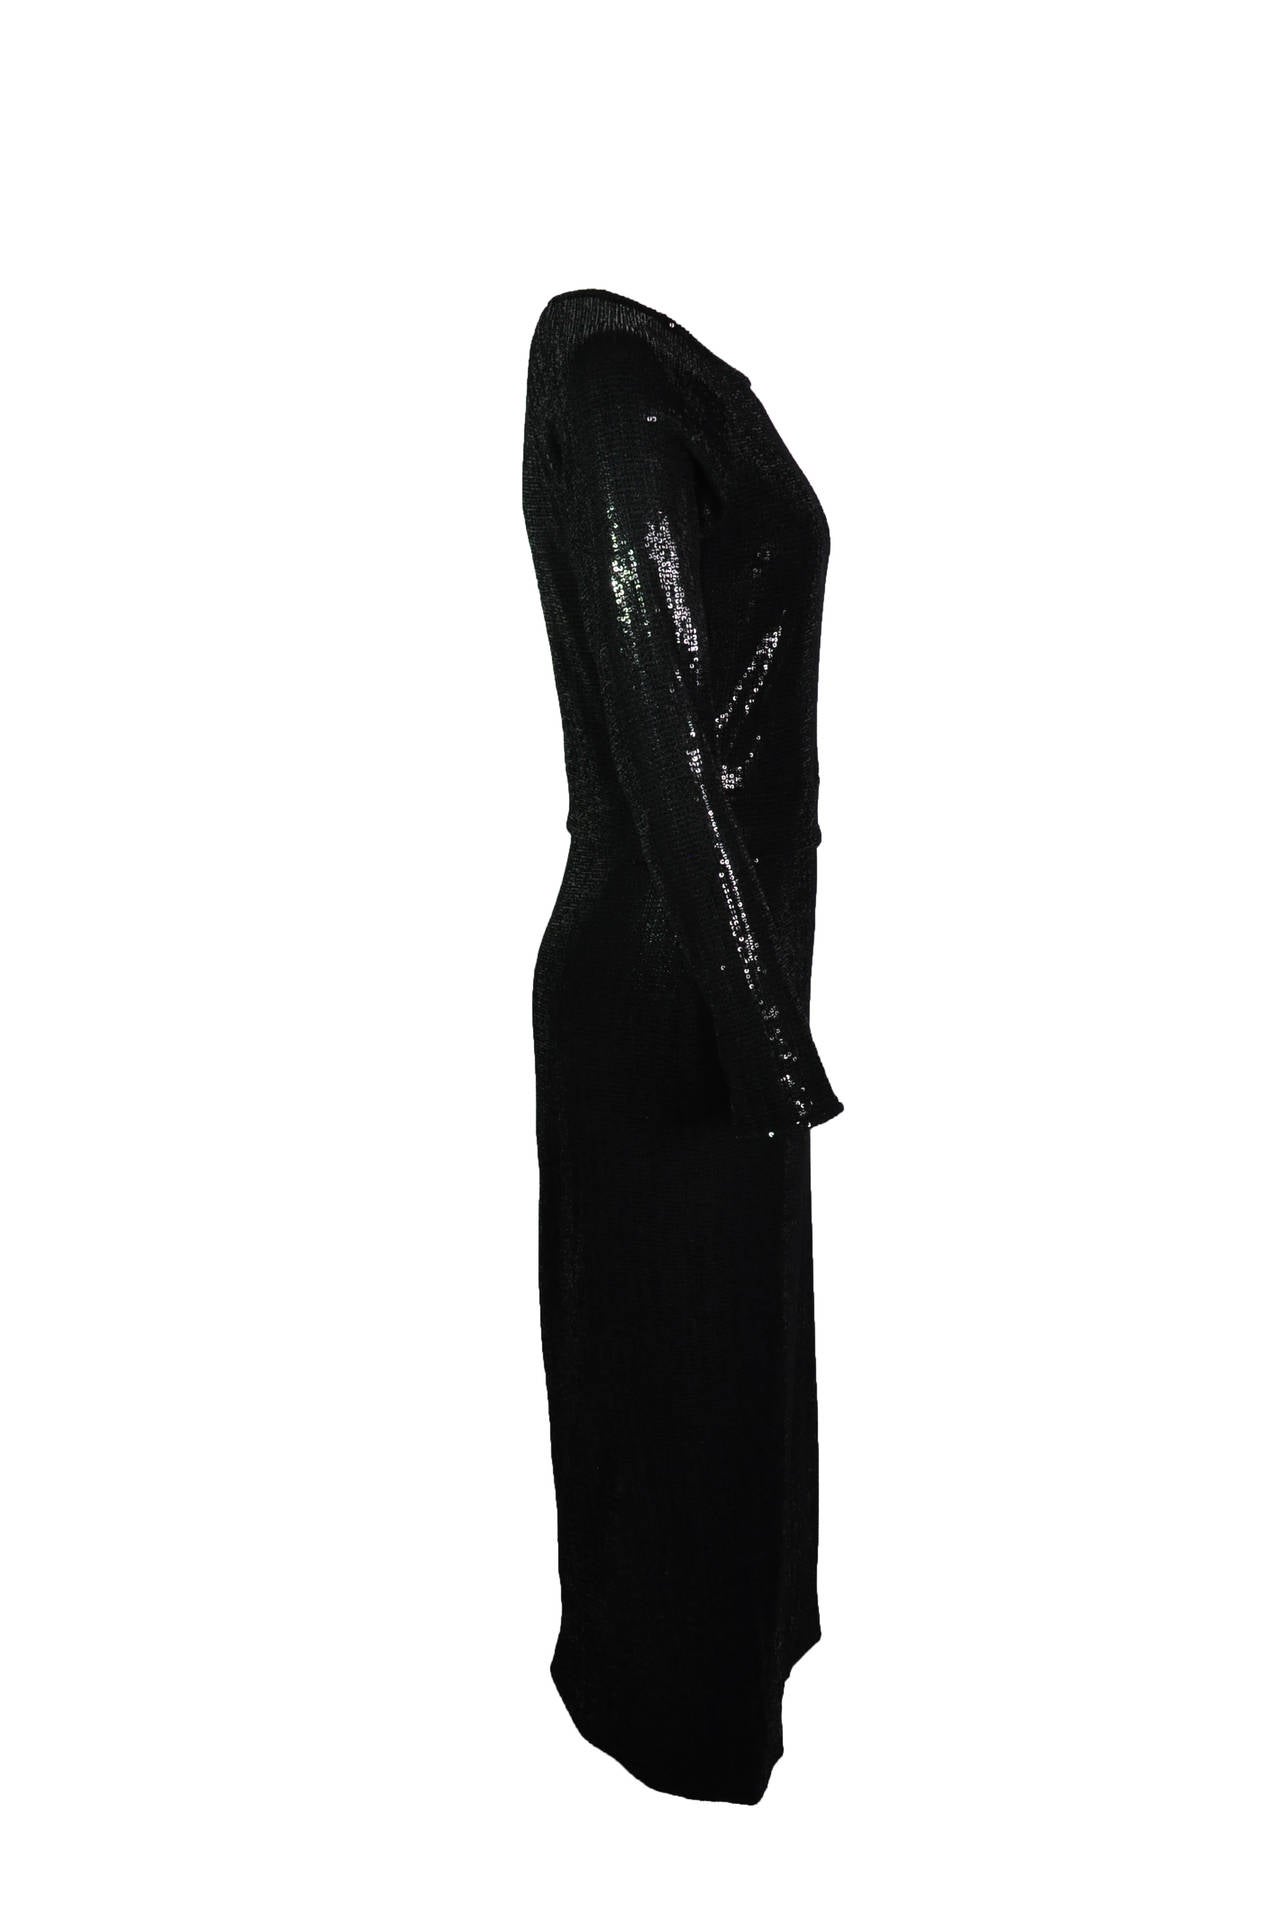 Giorgio Armani  Black Fully Sequined Evening Dress In Excellent Condition For Sale In Hong Kong, Hong Kong